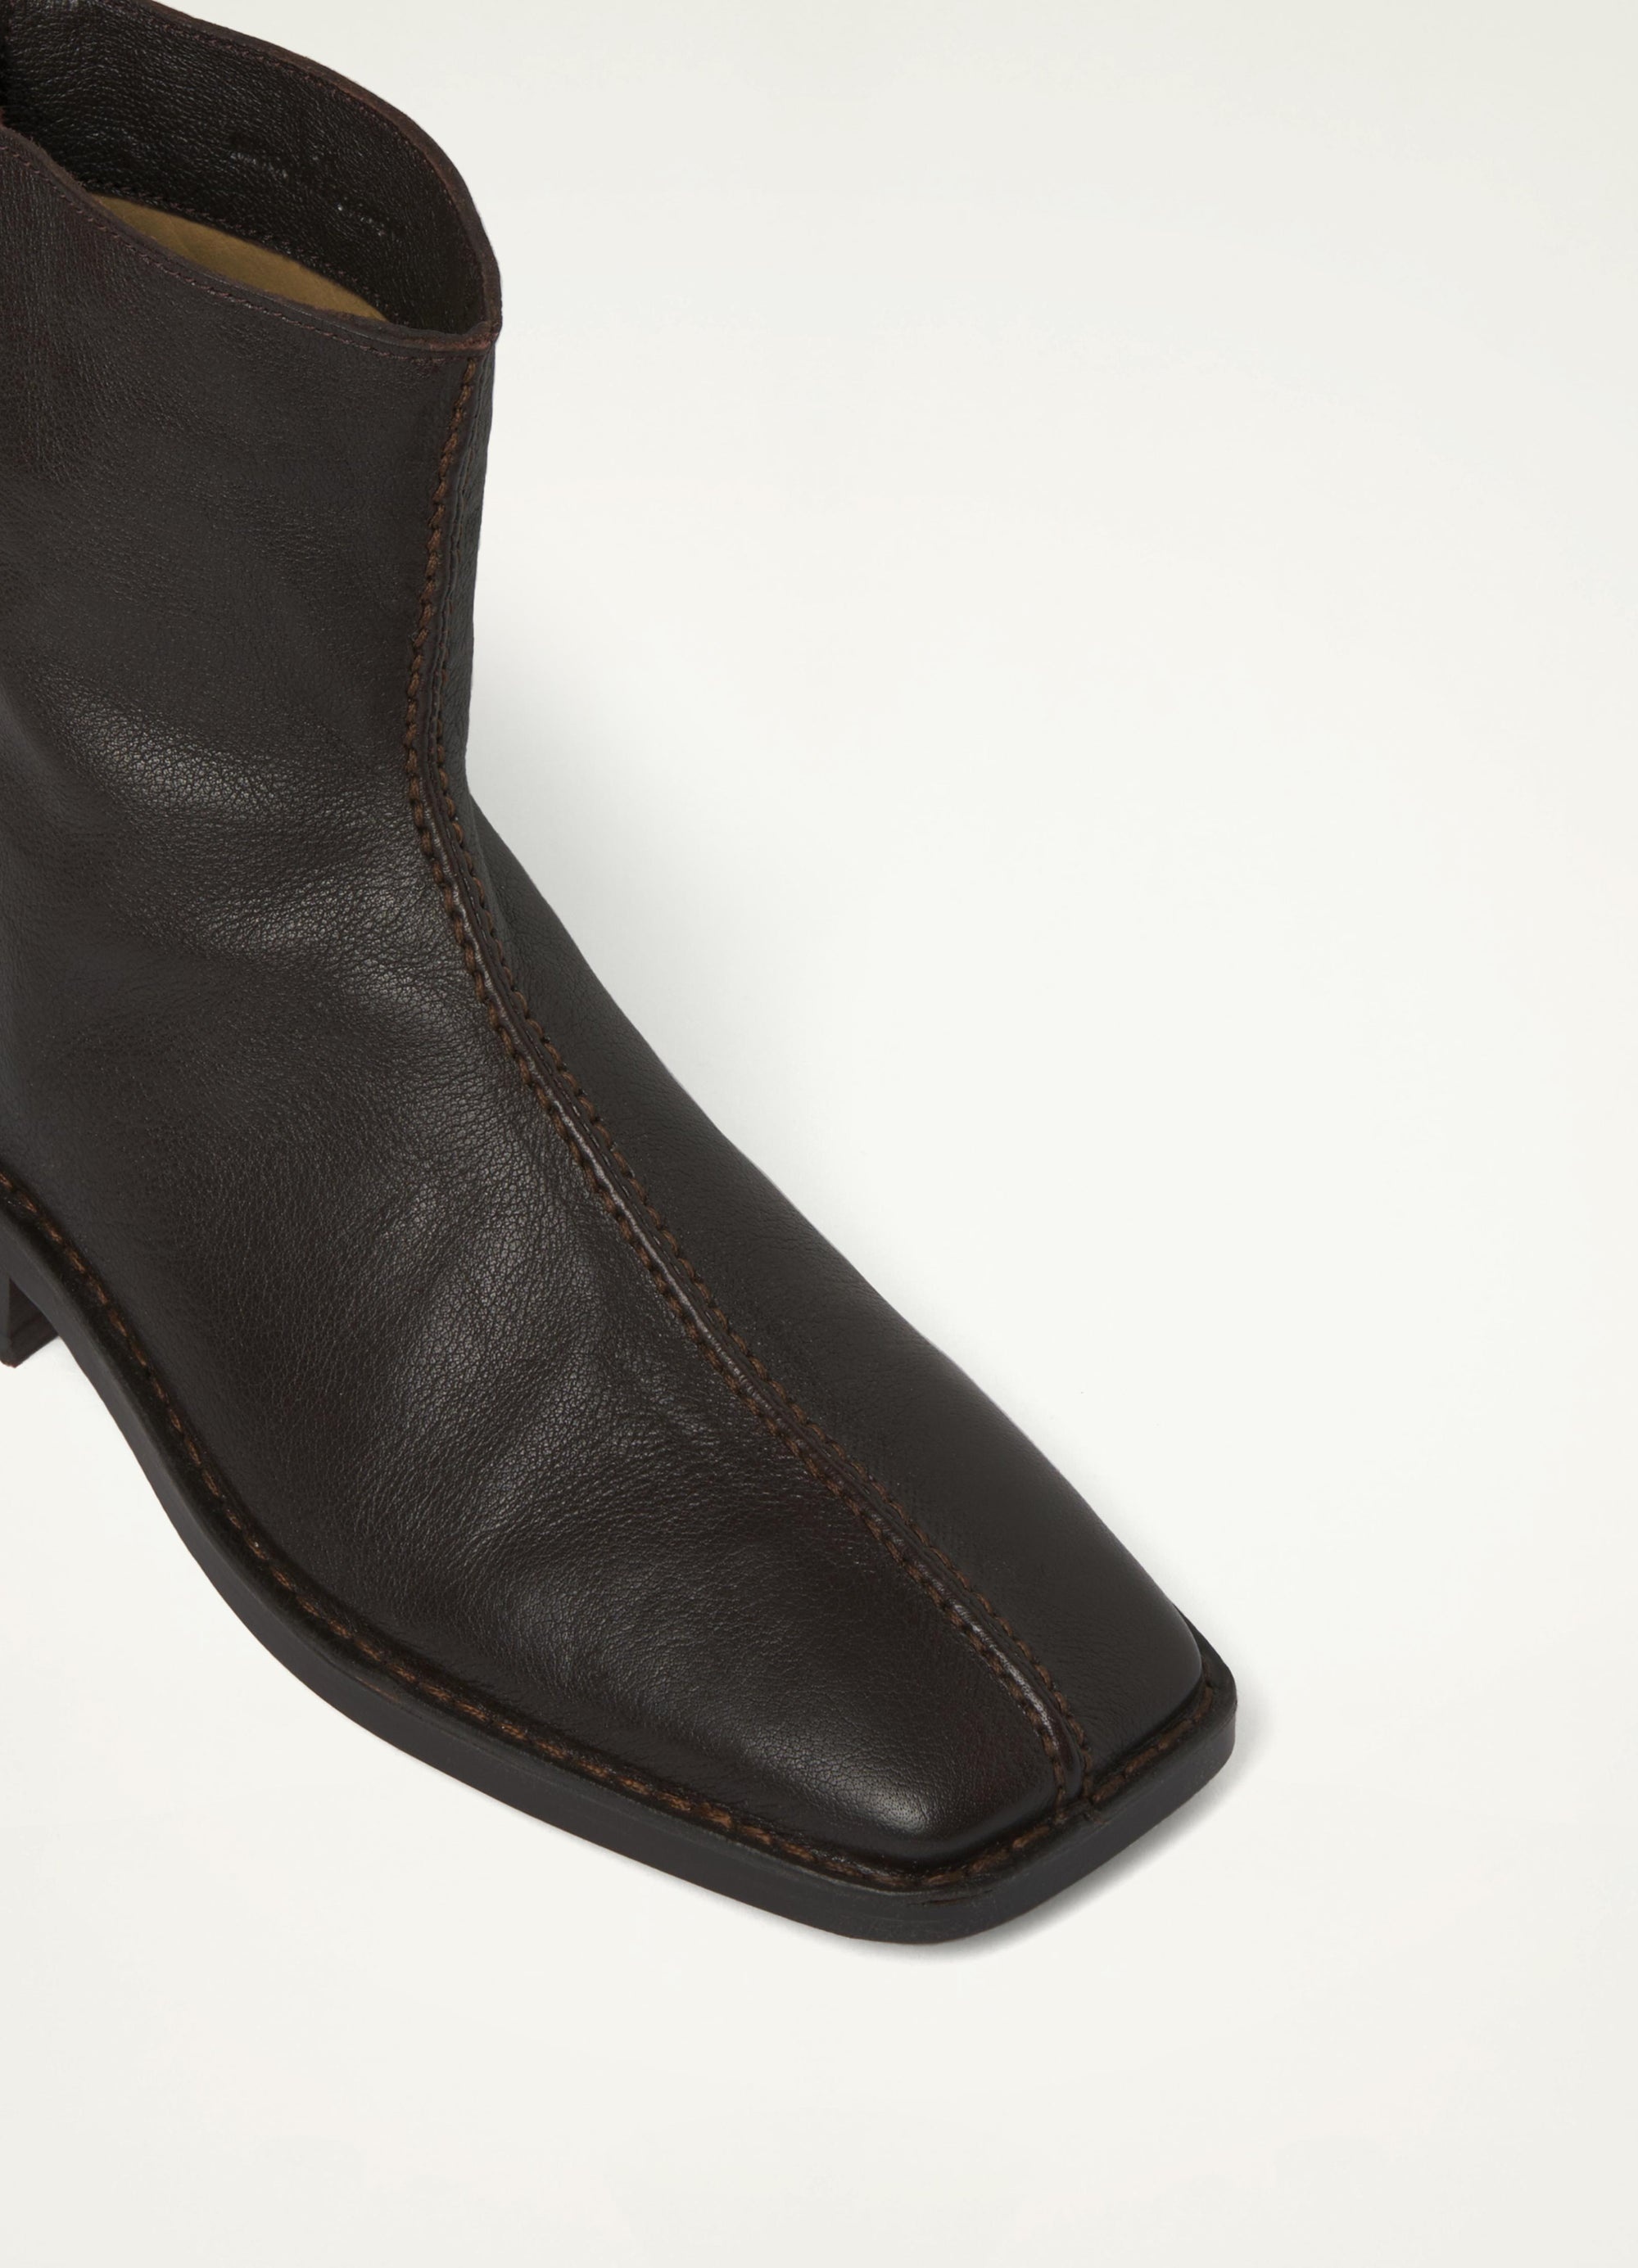 PIPED ZIPPED BOOTS
SOFT LEATHER - 4